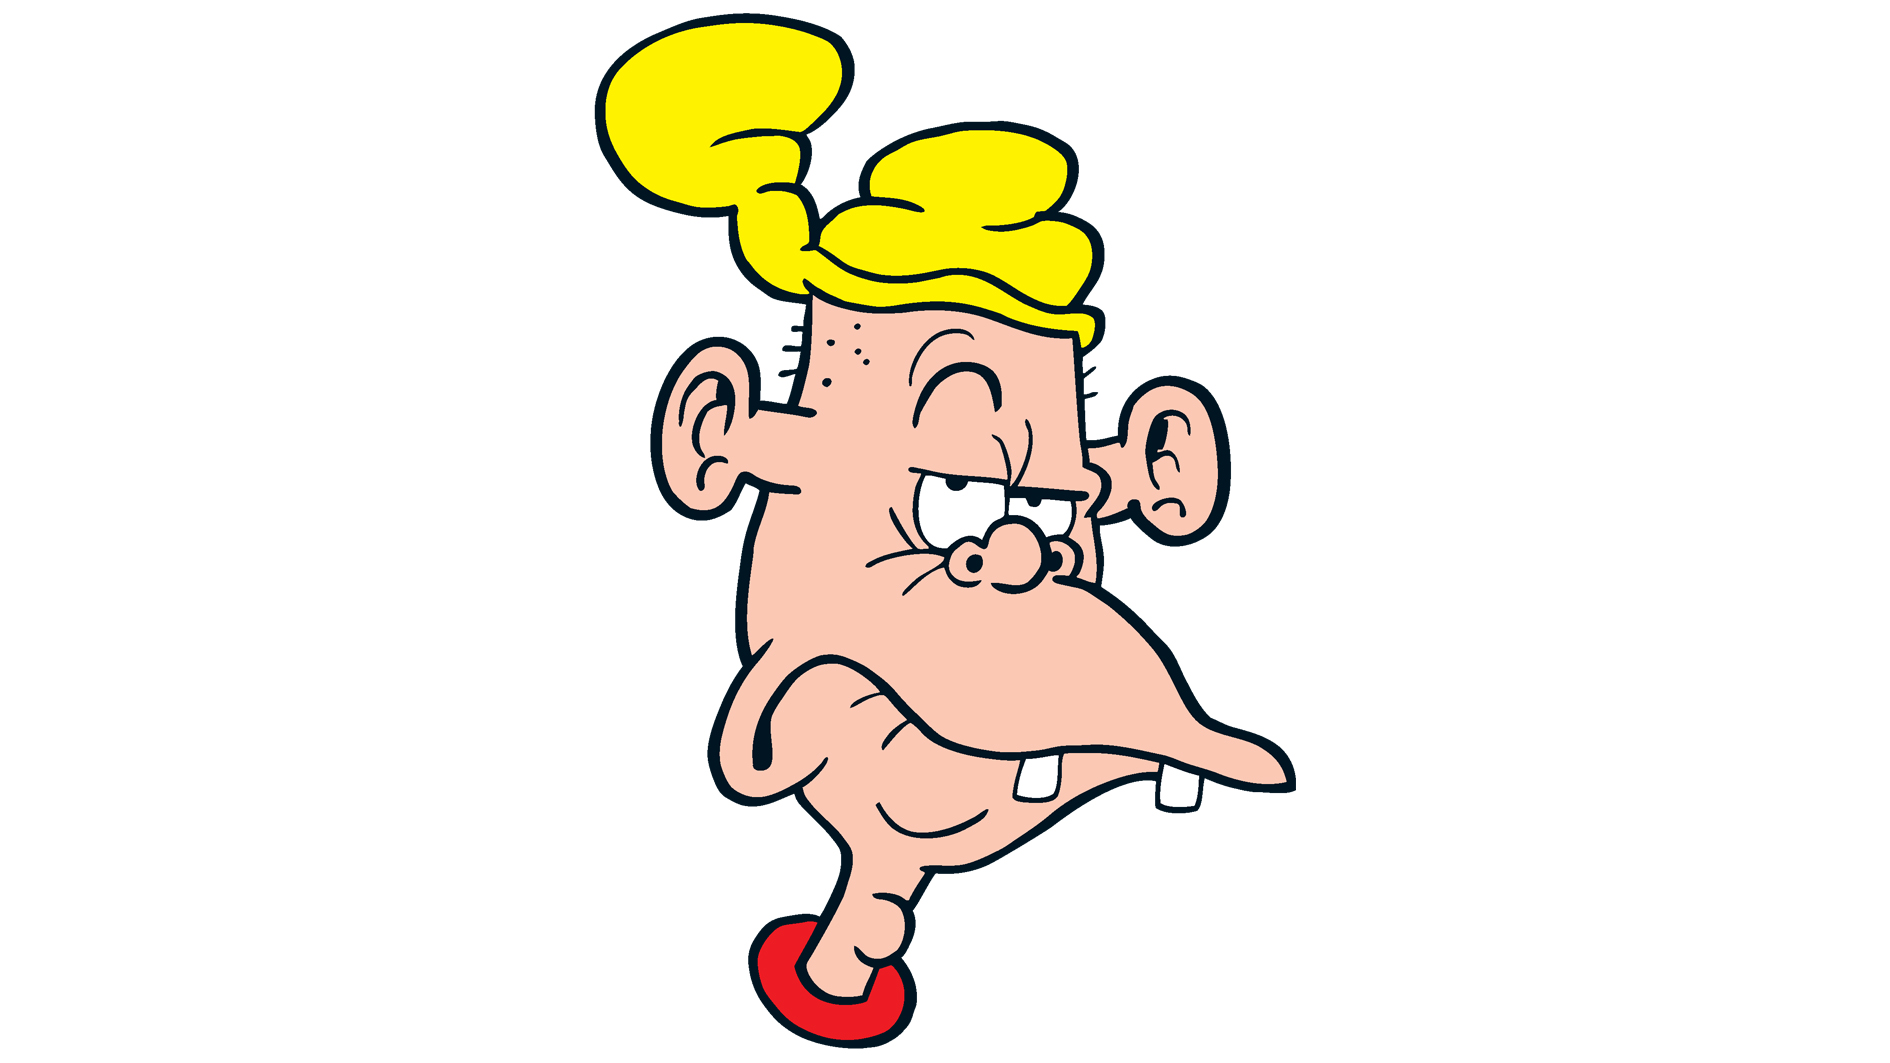 Oh dear! That isn't a good look from Plug of Beano's The Bash Street Kids